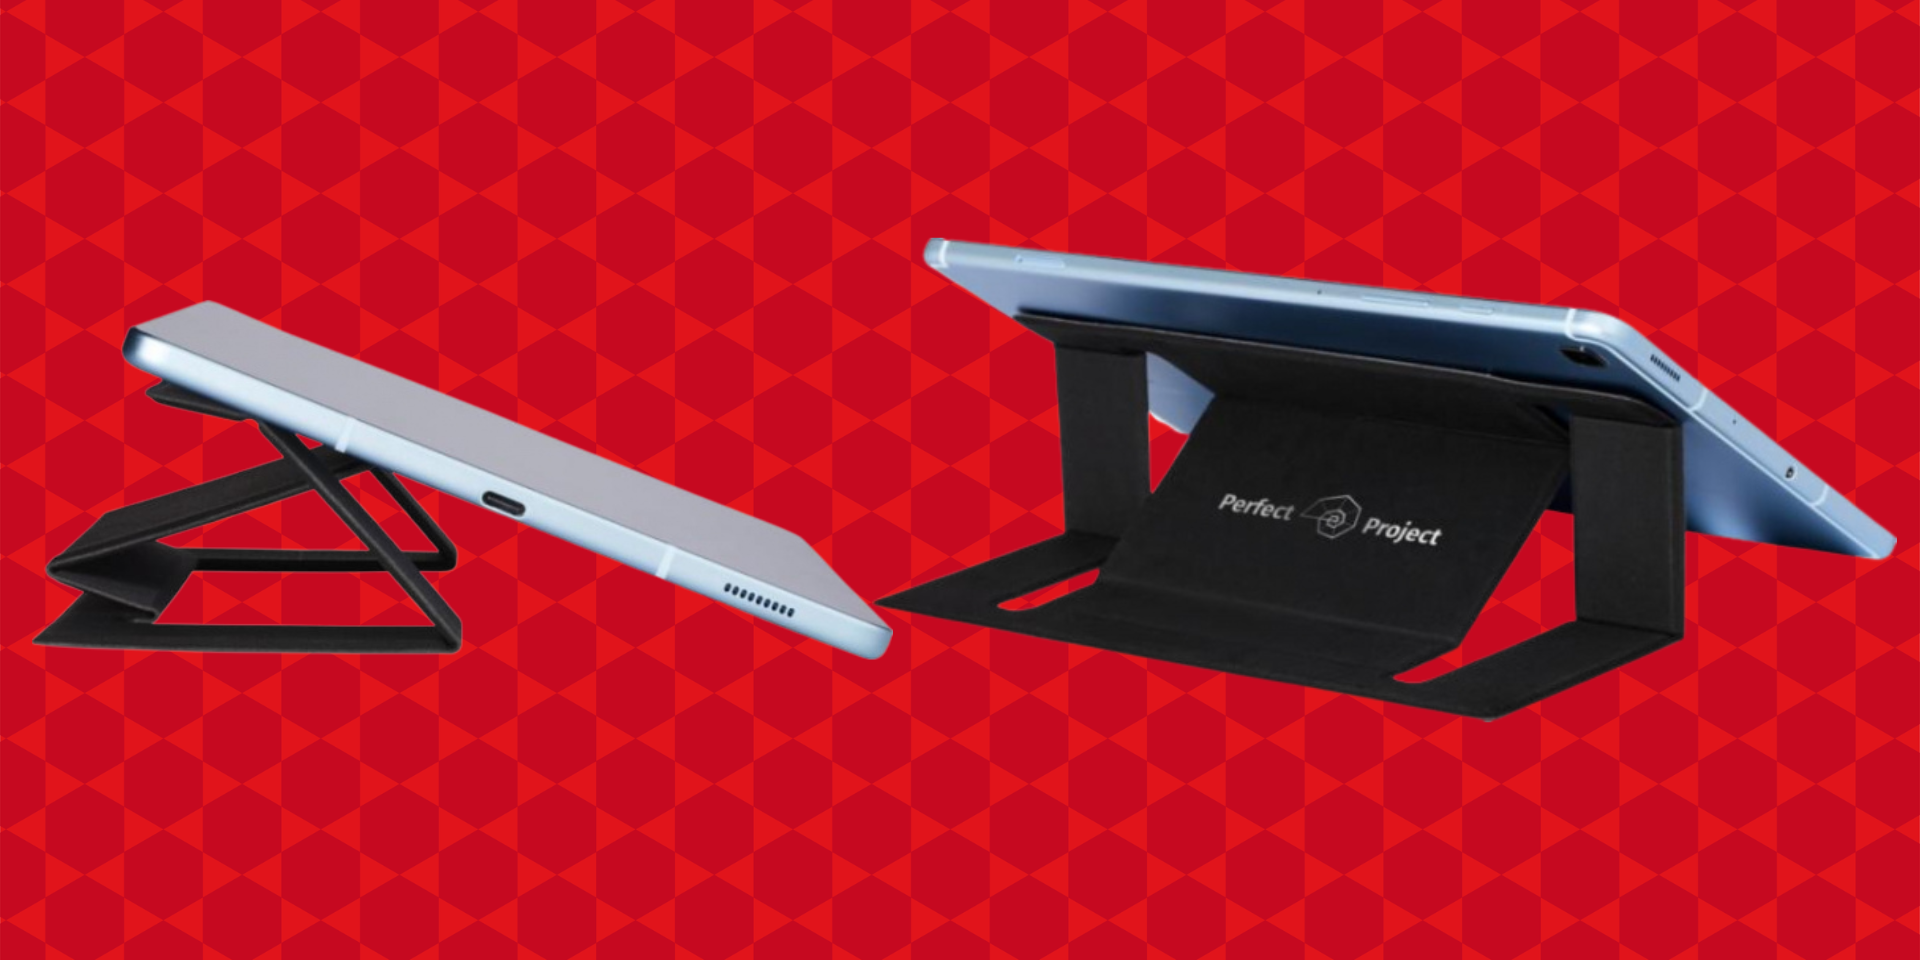 Tilt Laptop and Tablet Stand Promotional Product review 